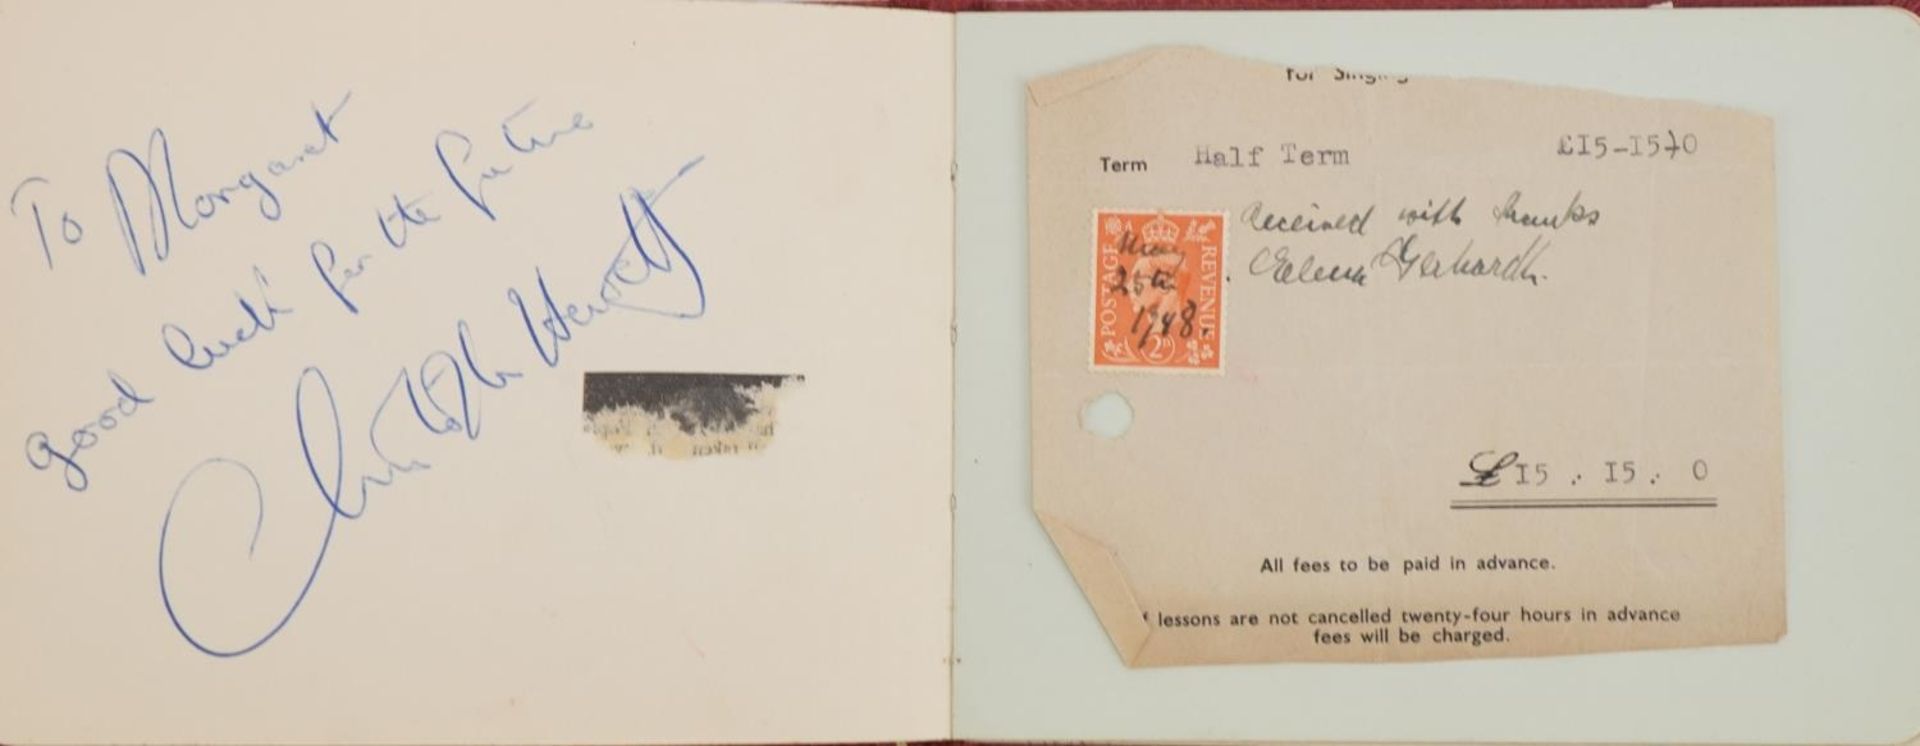 Two early 20th century autograph albums housing various autographs - Image 10 of 13